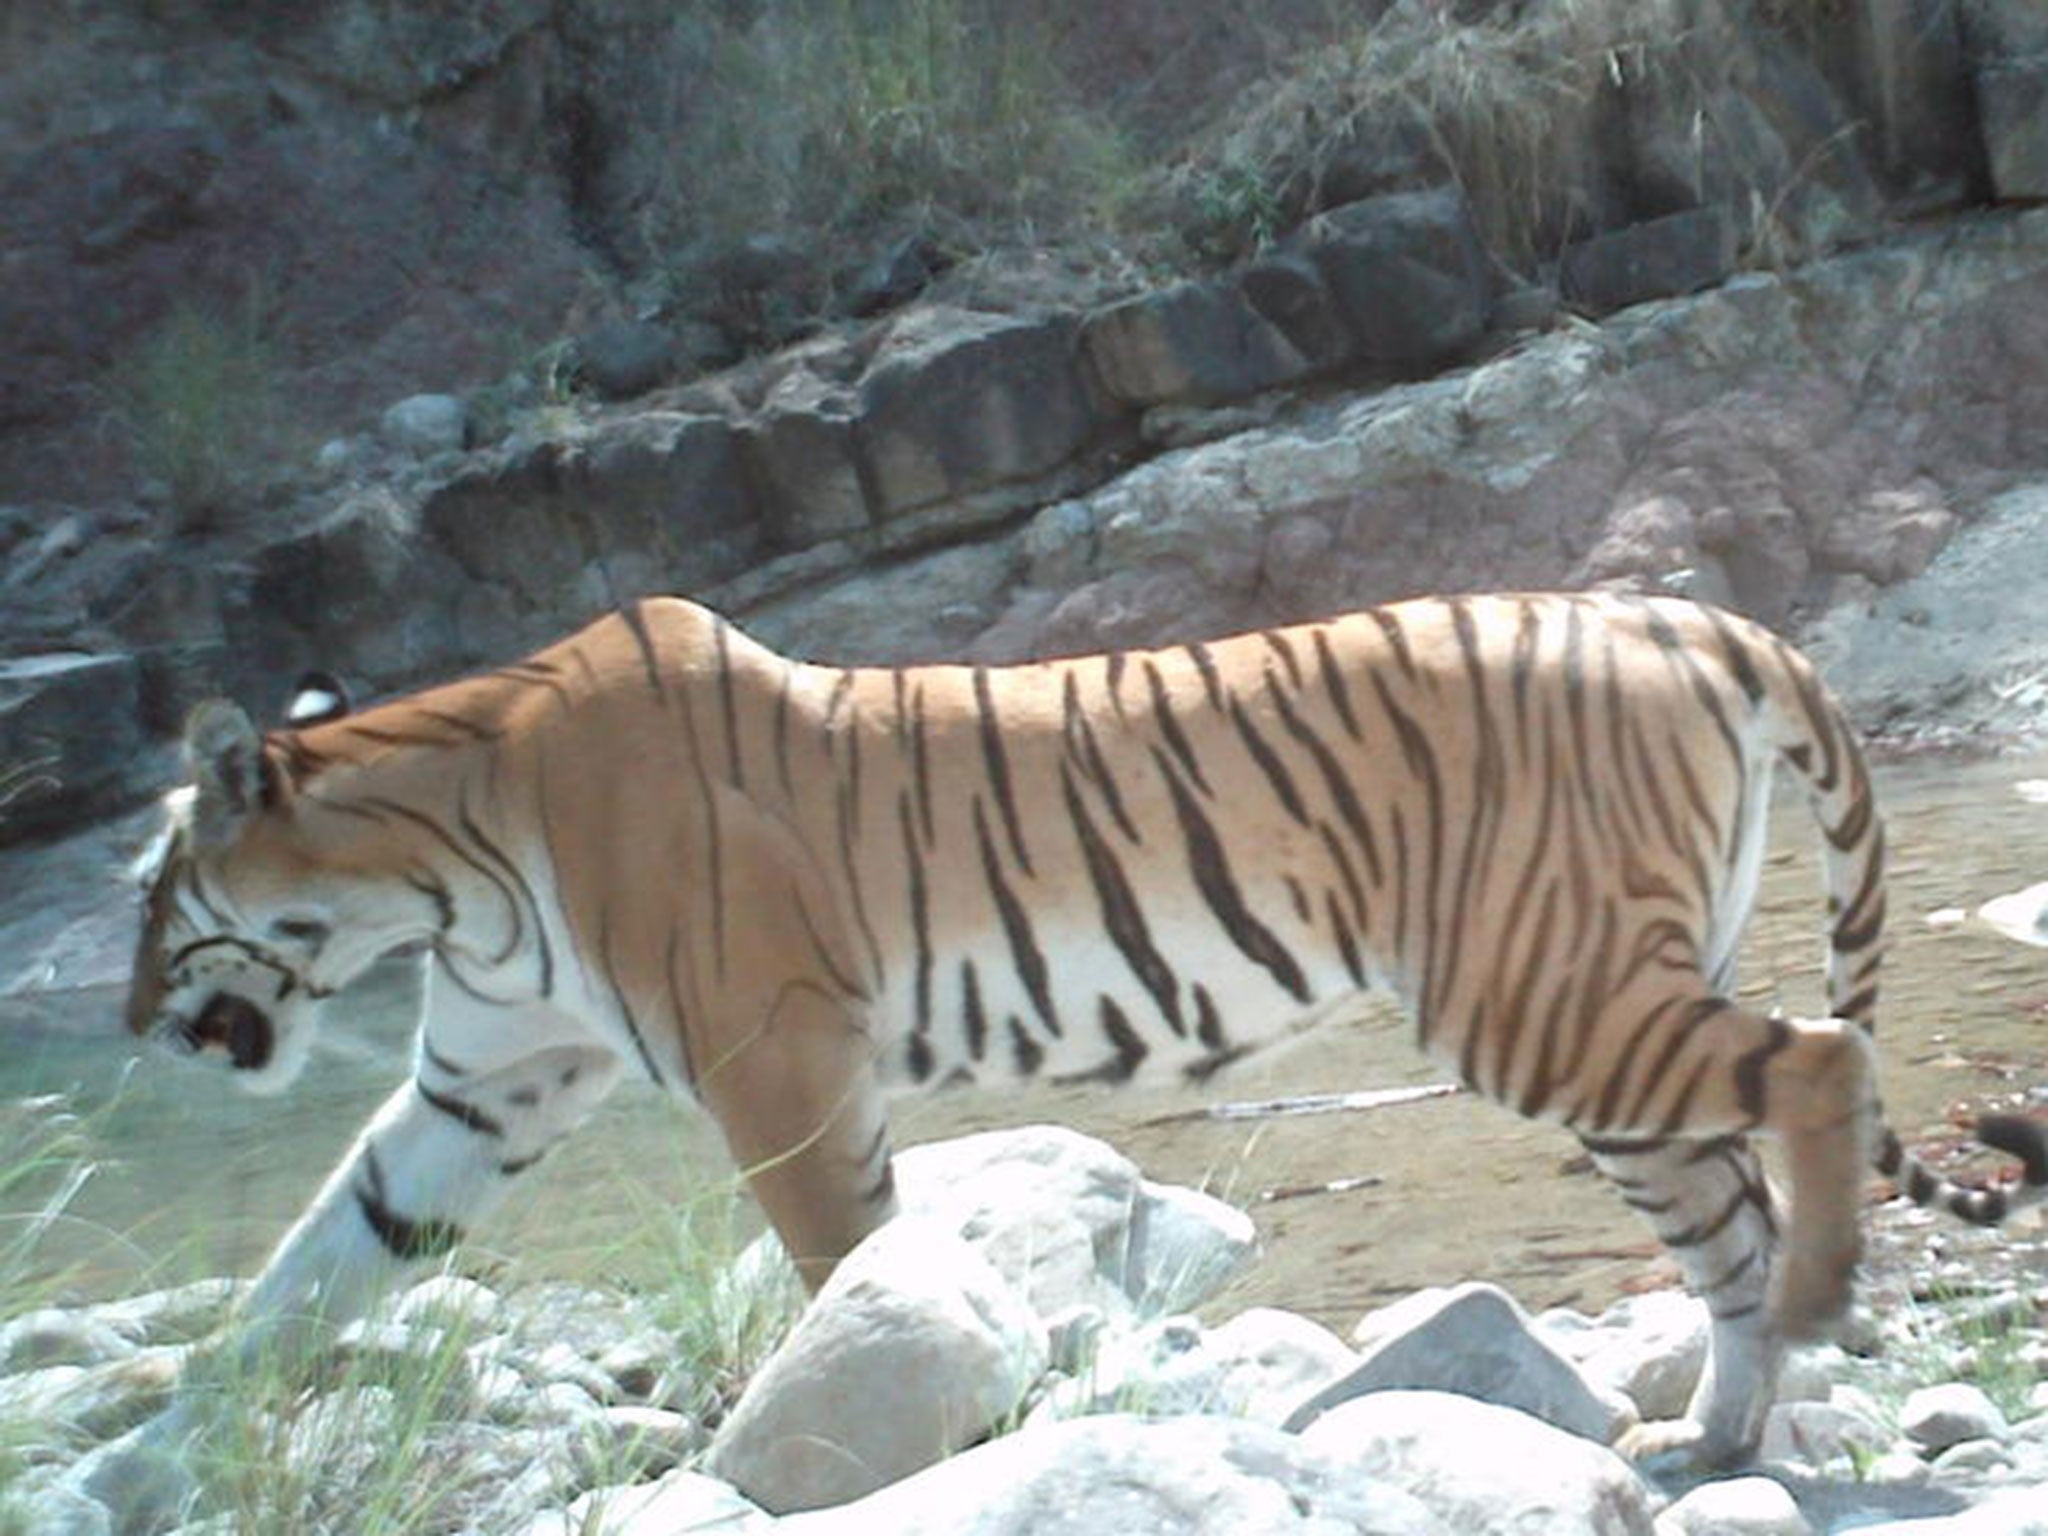 A Bengal tiger captured by a camera trap in Nepal